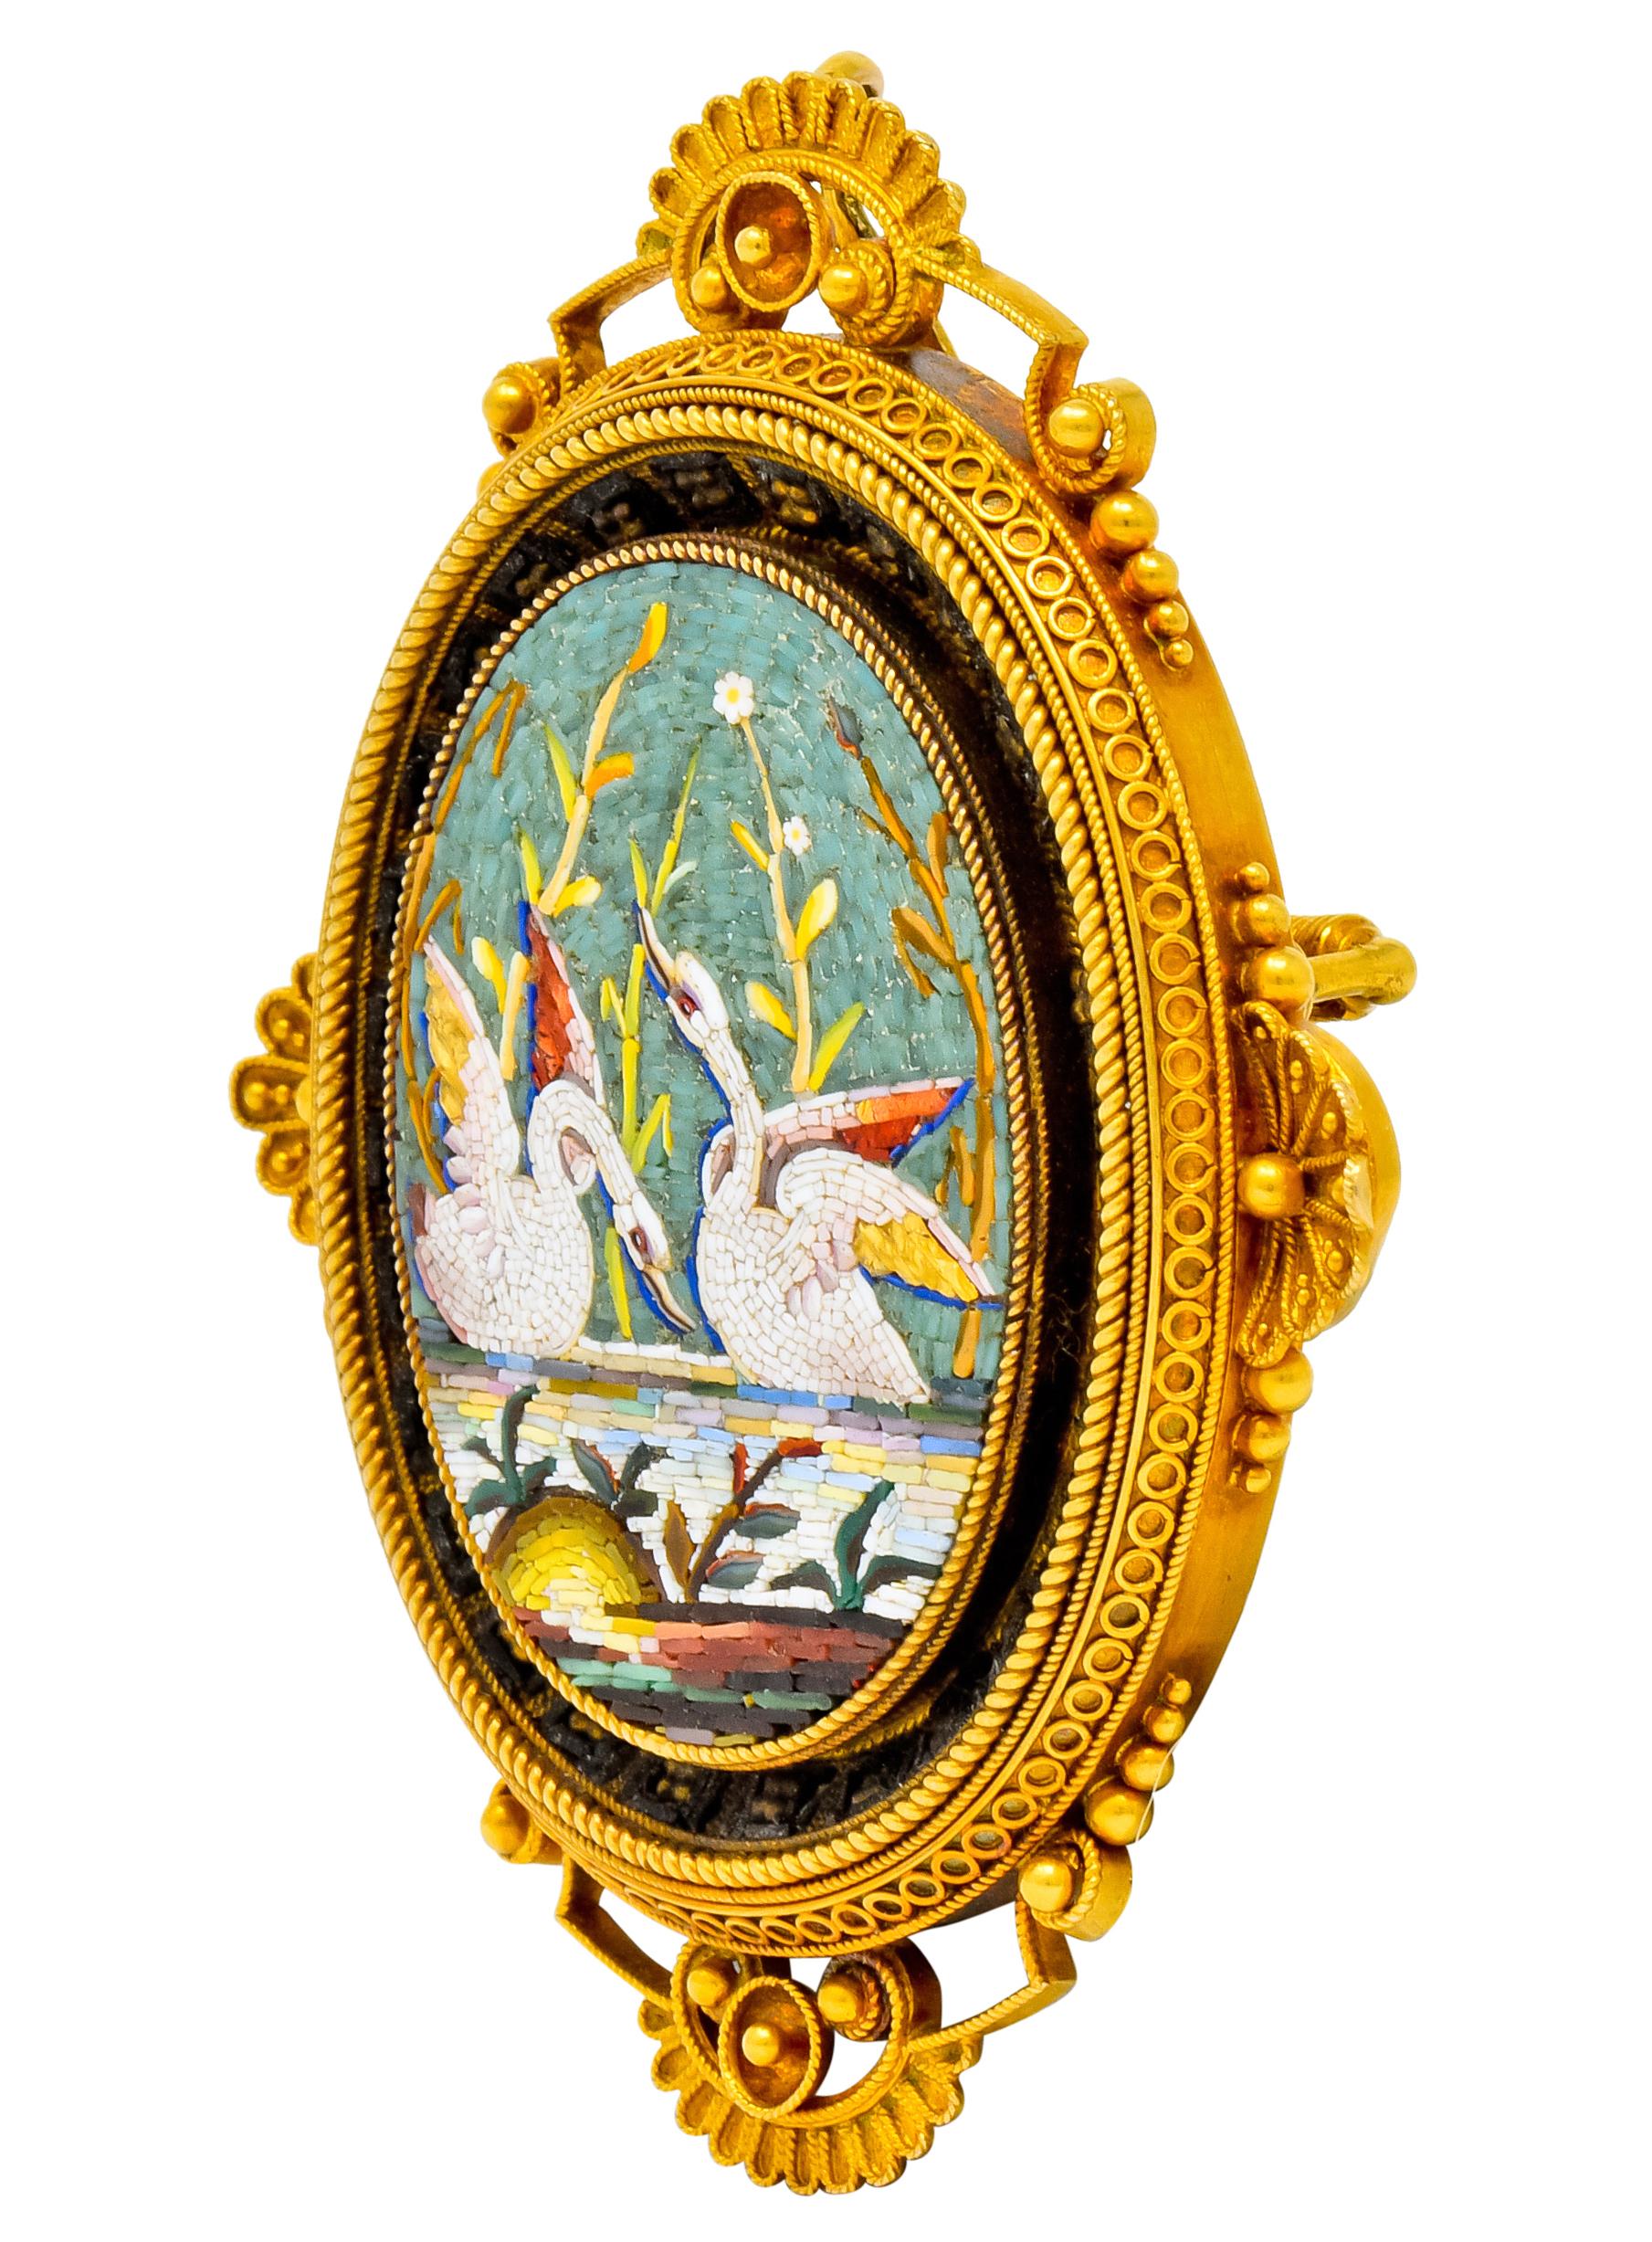 Pendant brooch designed as an ornate frame with scalloped accents at each cardinal point, a circle motif surround, and gold bead detail throughout

Centering an oval depiction of two playful swans floating in water amongst flowers and foliate